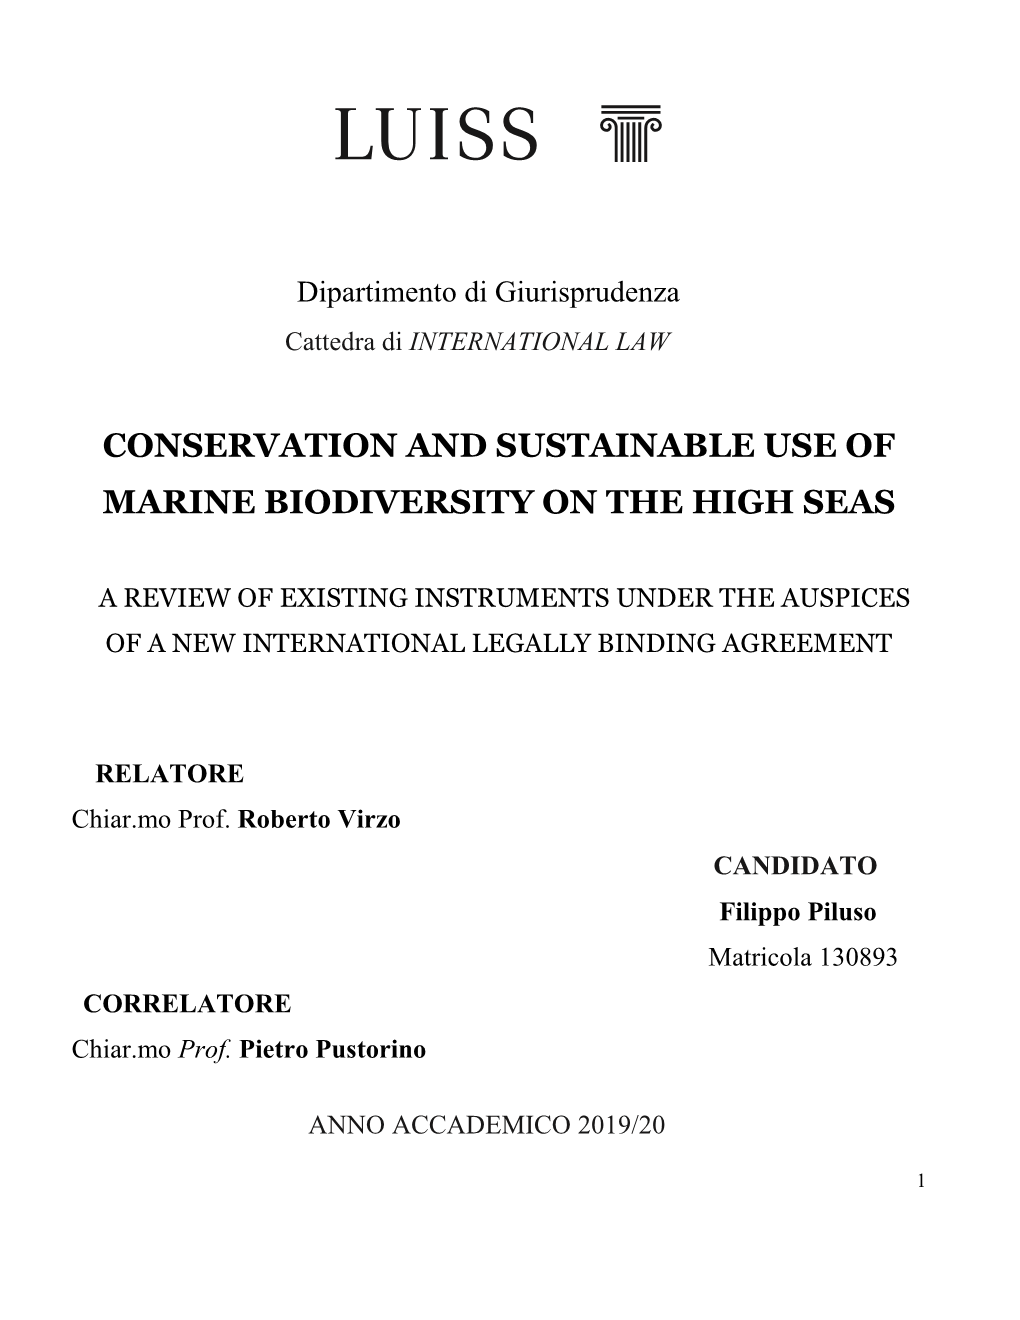 Conservation and Sustainable Use of Marine Biodiversity on the High Seas